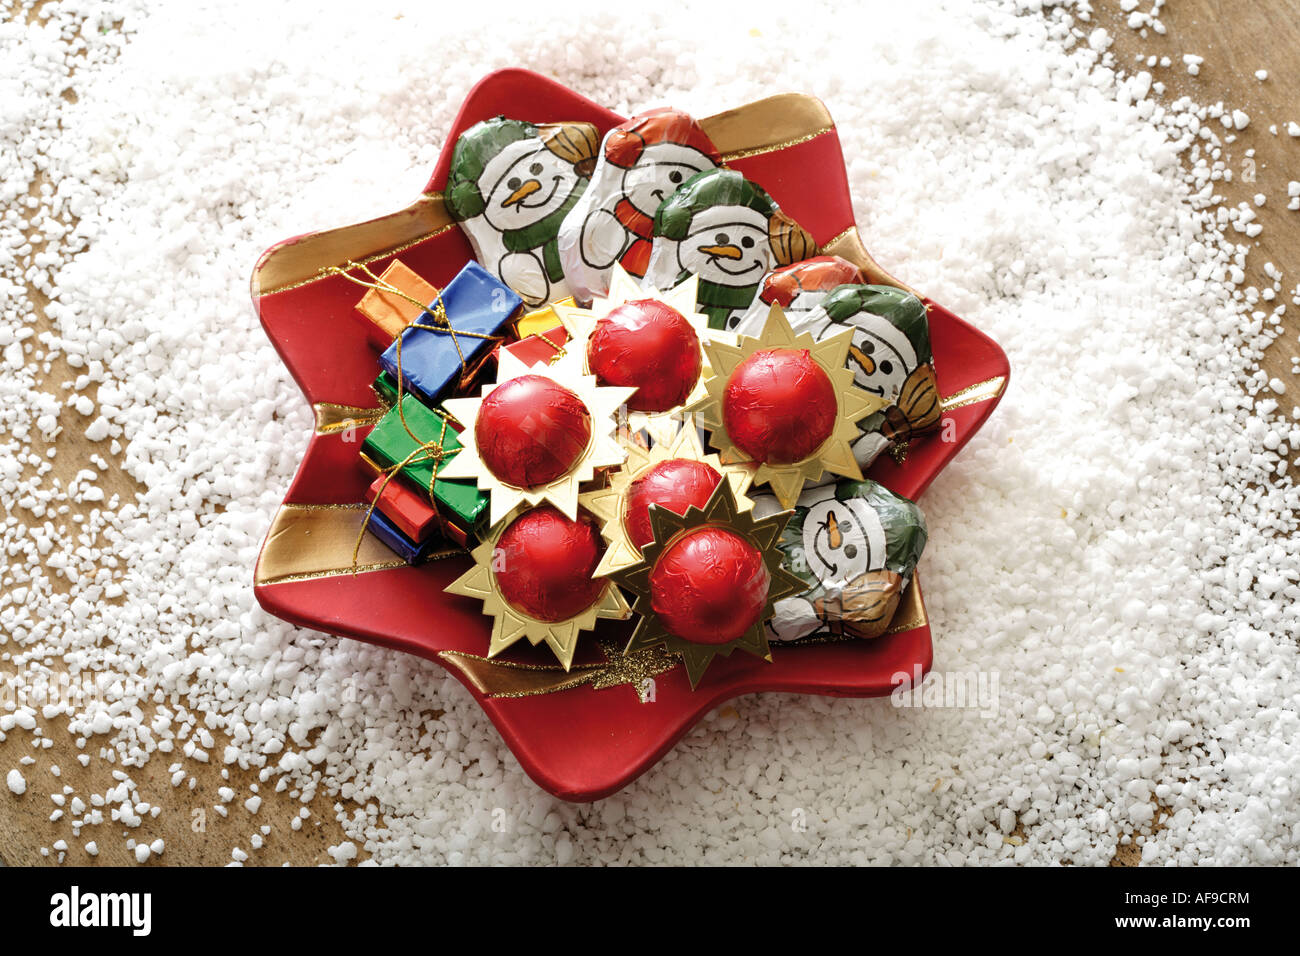 Christmas plate with sweets Stock Photo